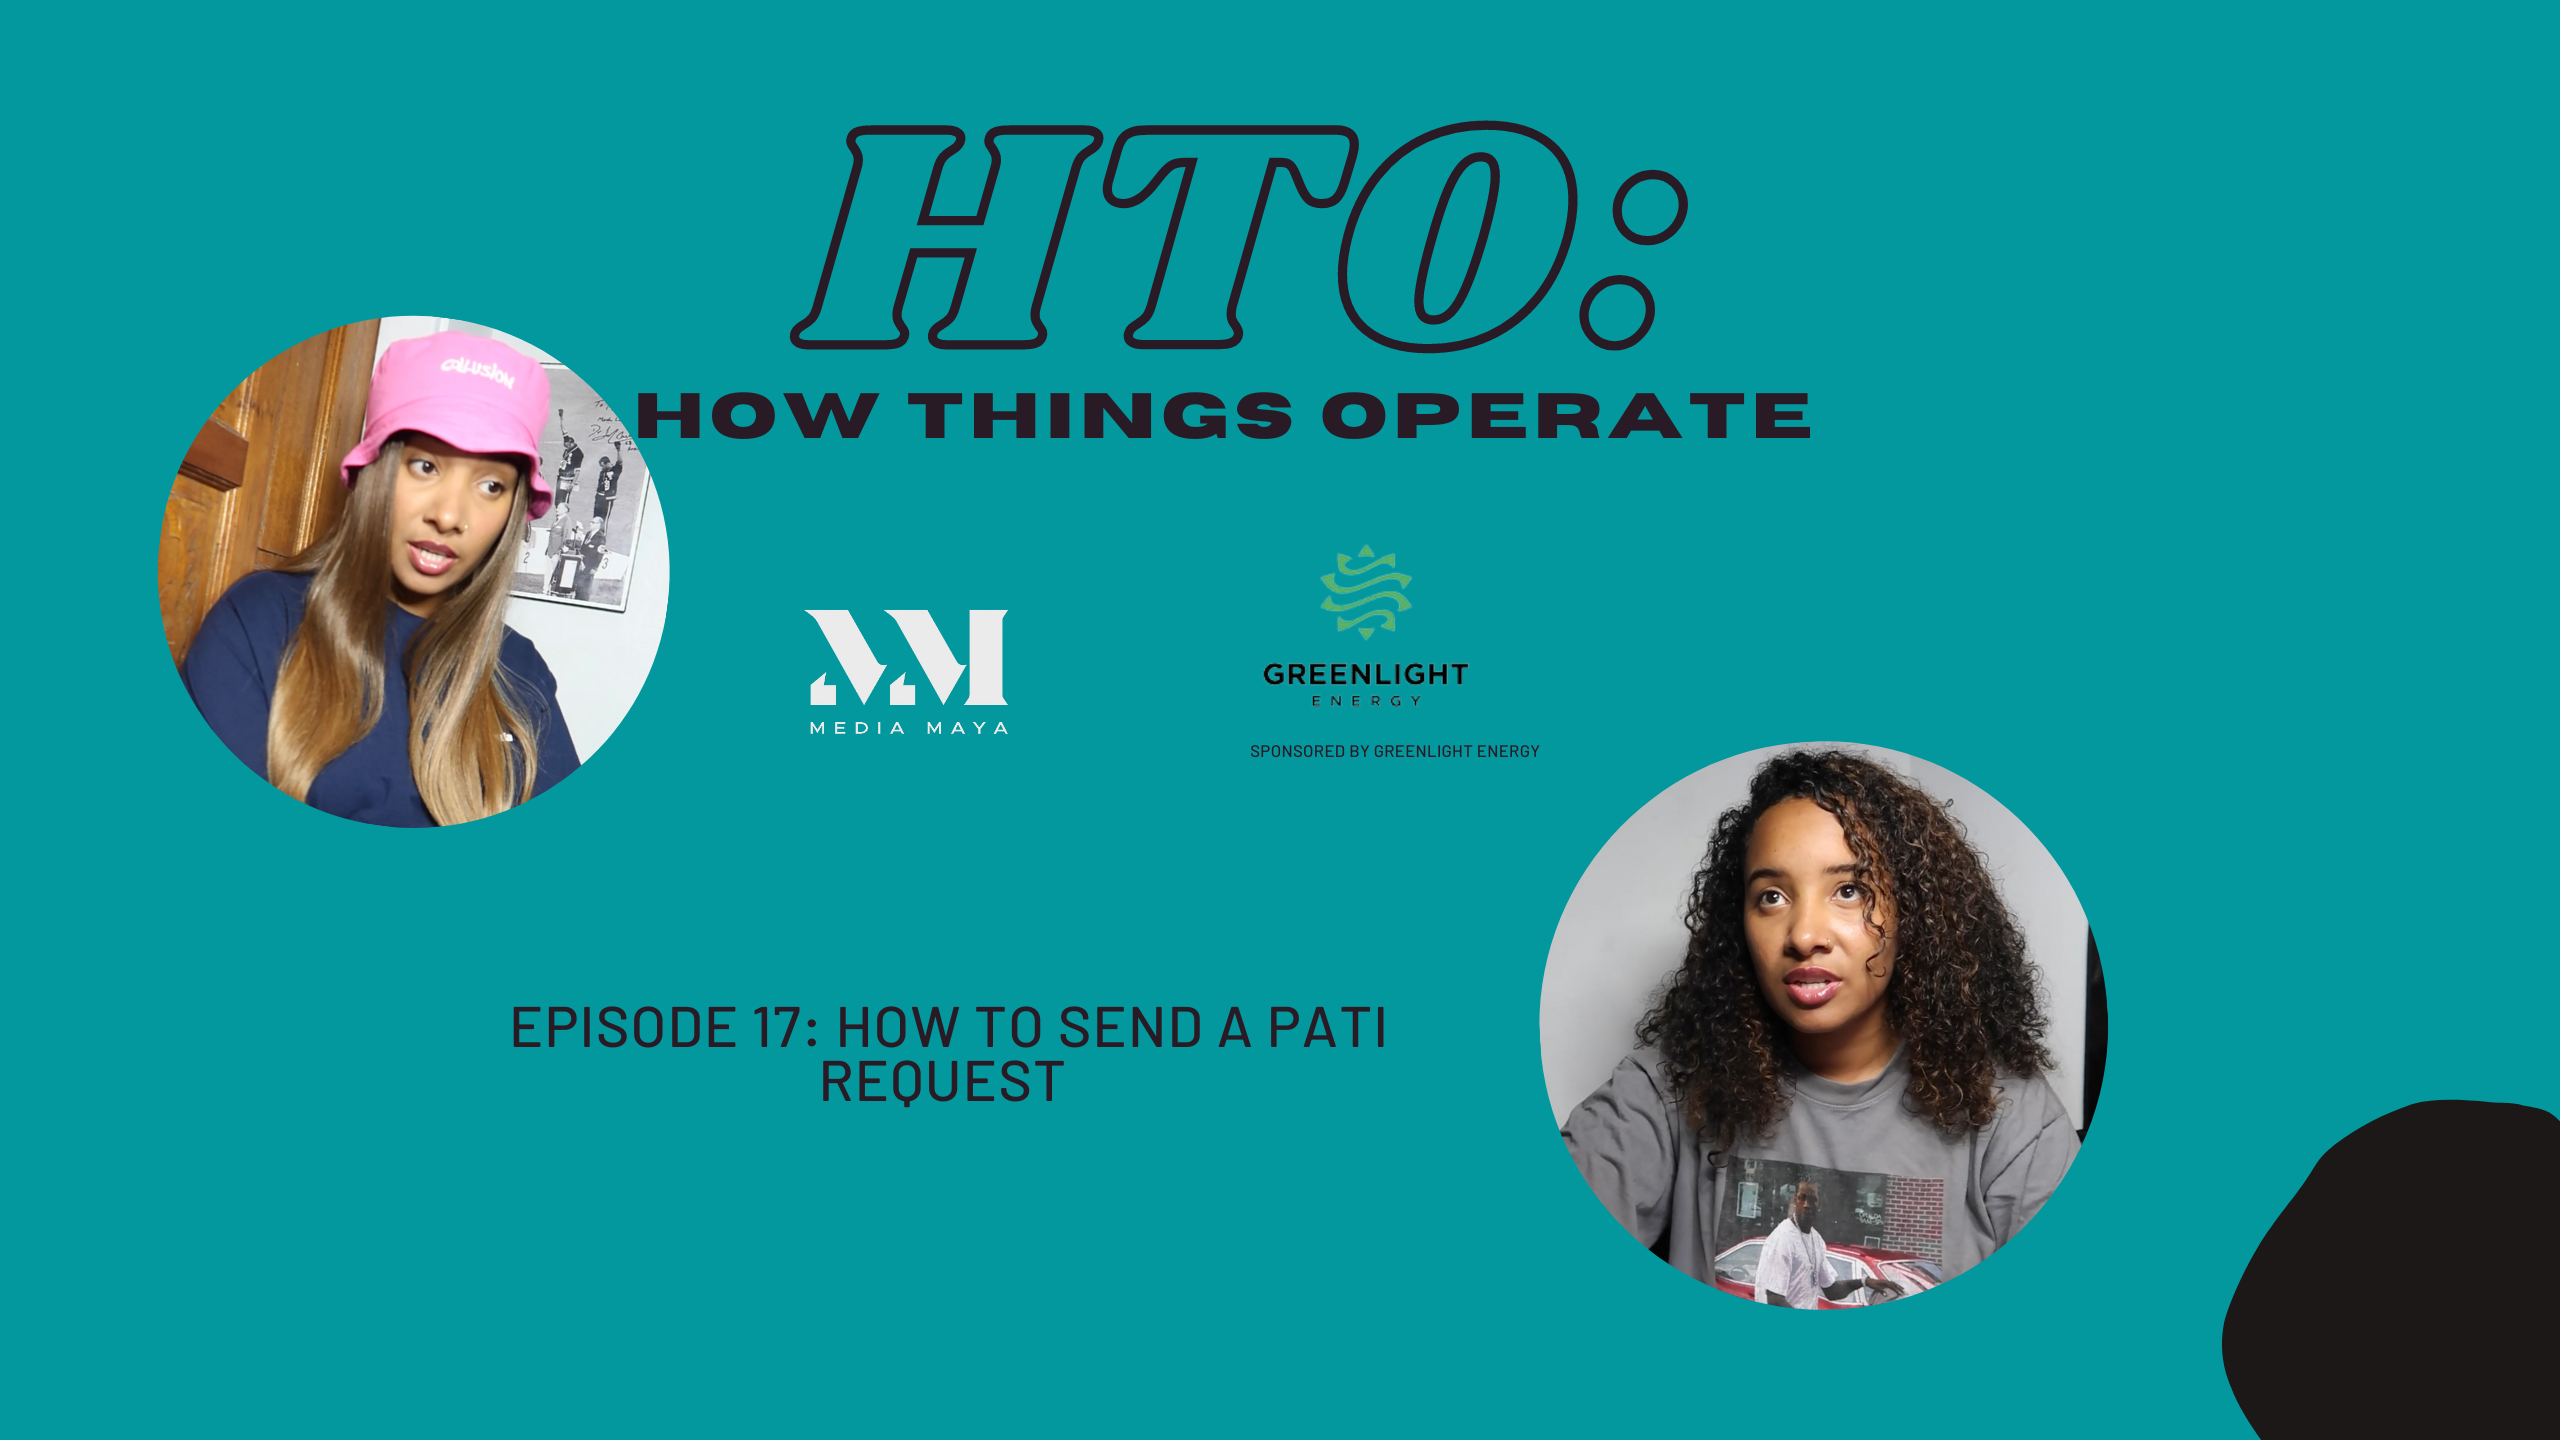 Hto Ep 17 How To Send A Pati Request – Media Maya